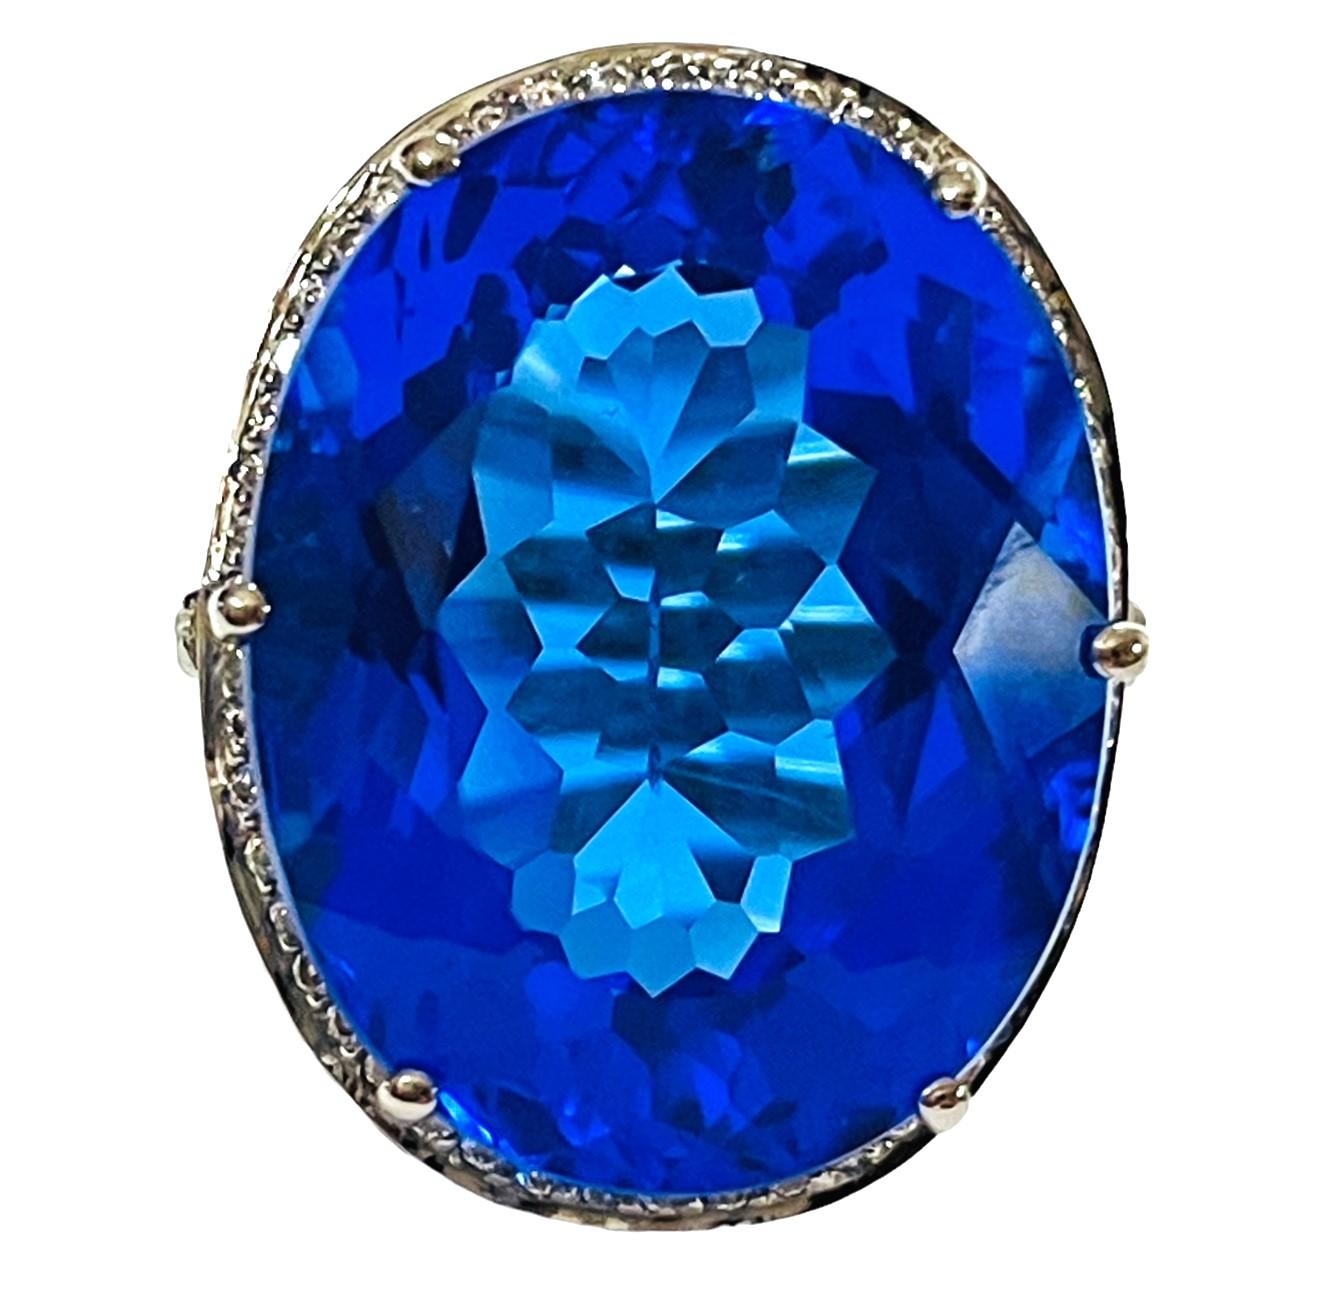 What a gorgeous eye-popping stone.  It is 21.50 Cts and measures 21.0 x 16.3 mm.  The color is so brilliant and it just sparkles and shimmers!   Sure to get noticed.  The weight in Grams is 8.21.   I have many items on auction that have matching